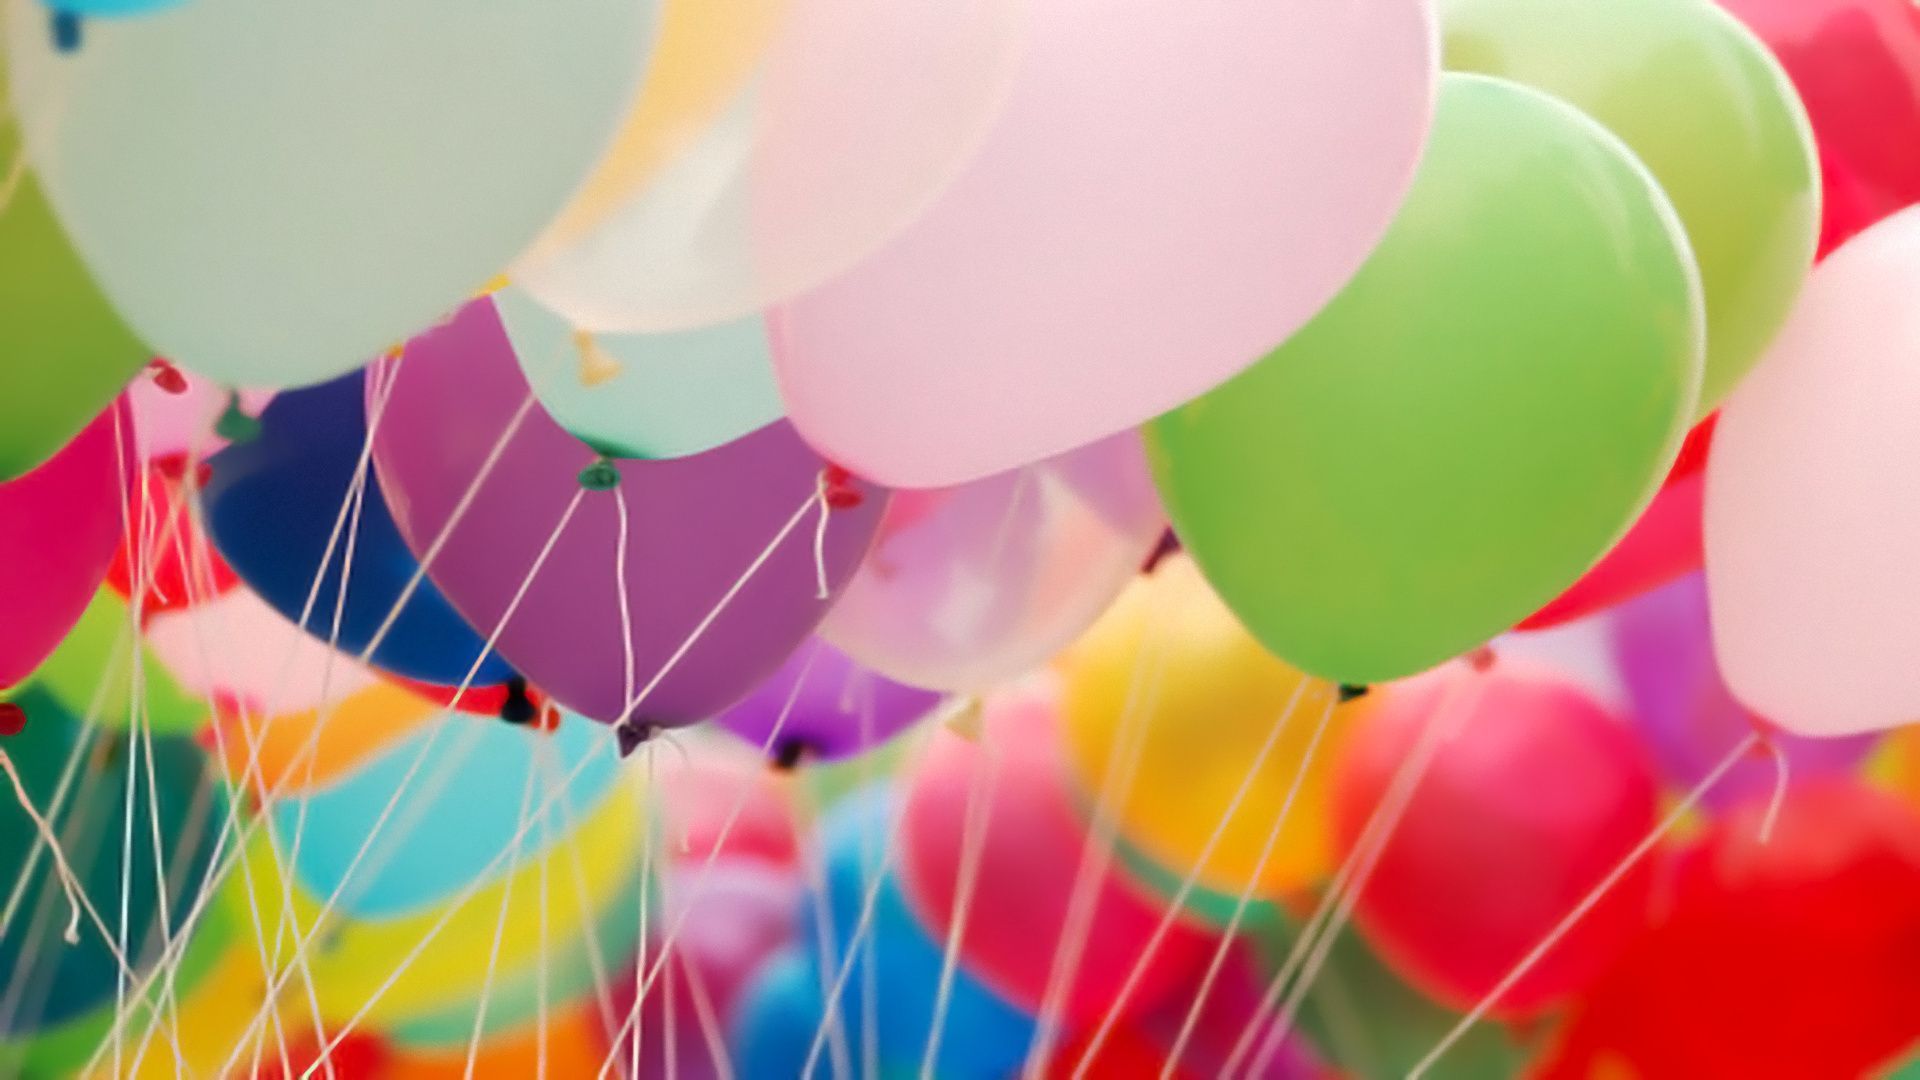 Balloons HD Wallpapers, Balloons Images Free, New Wallpapers